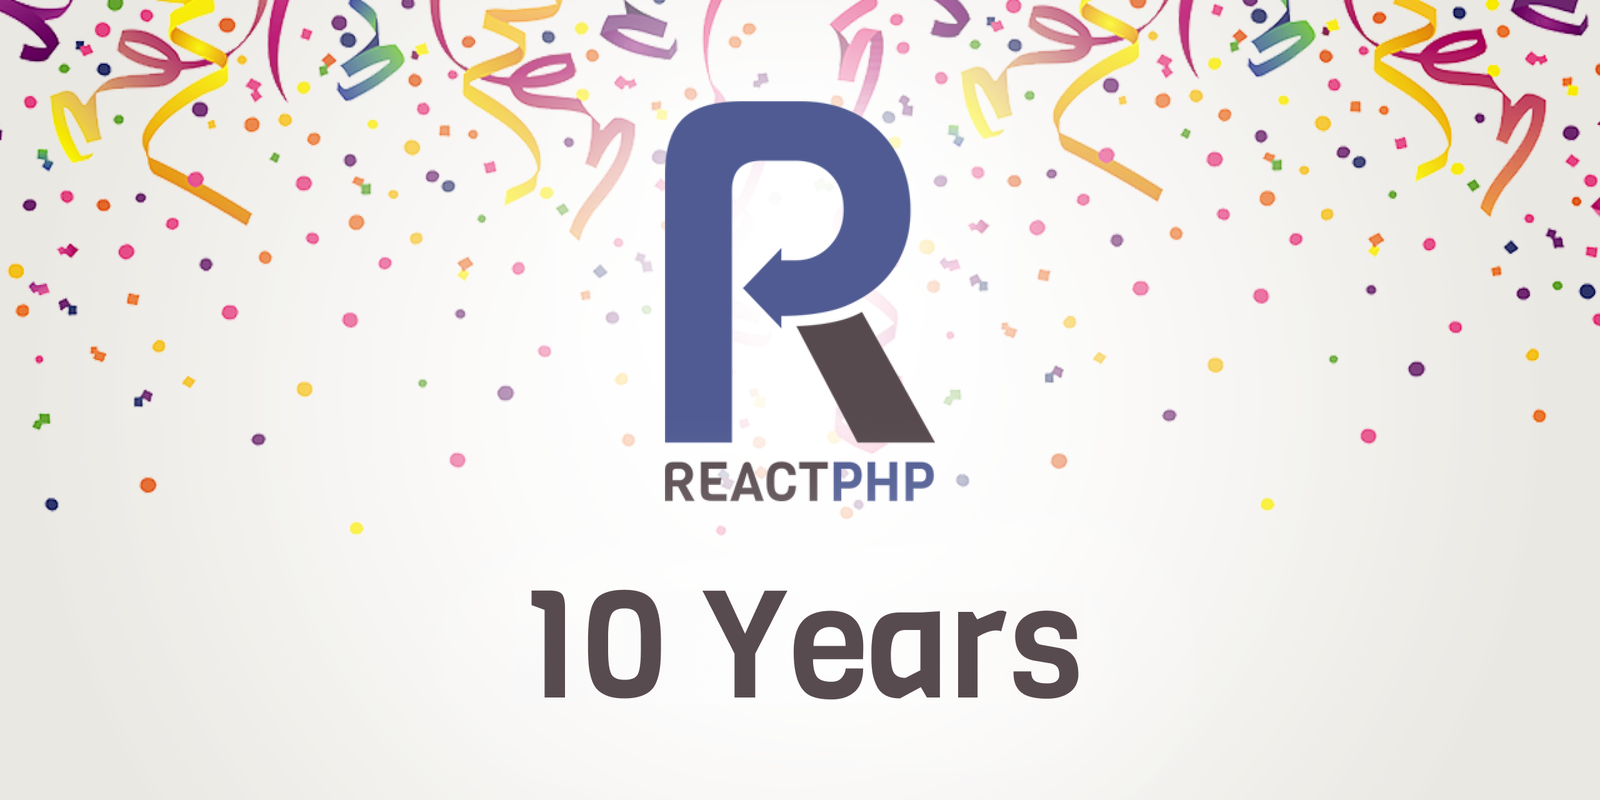 ReactPHP – 10 years